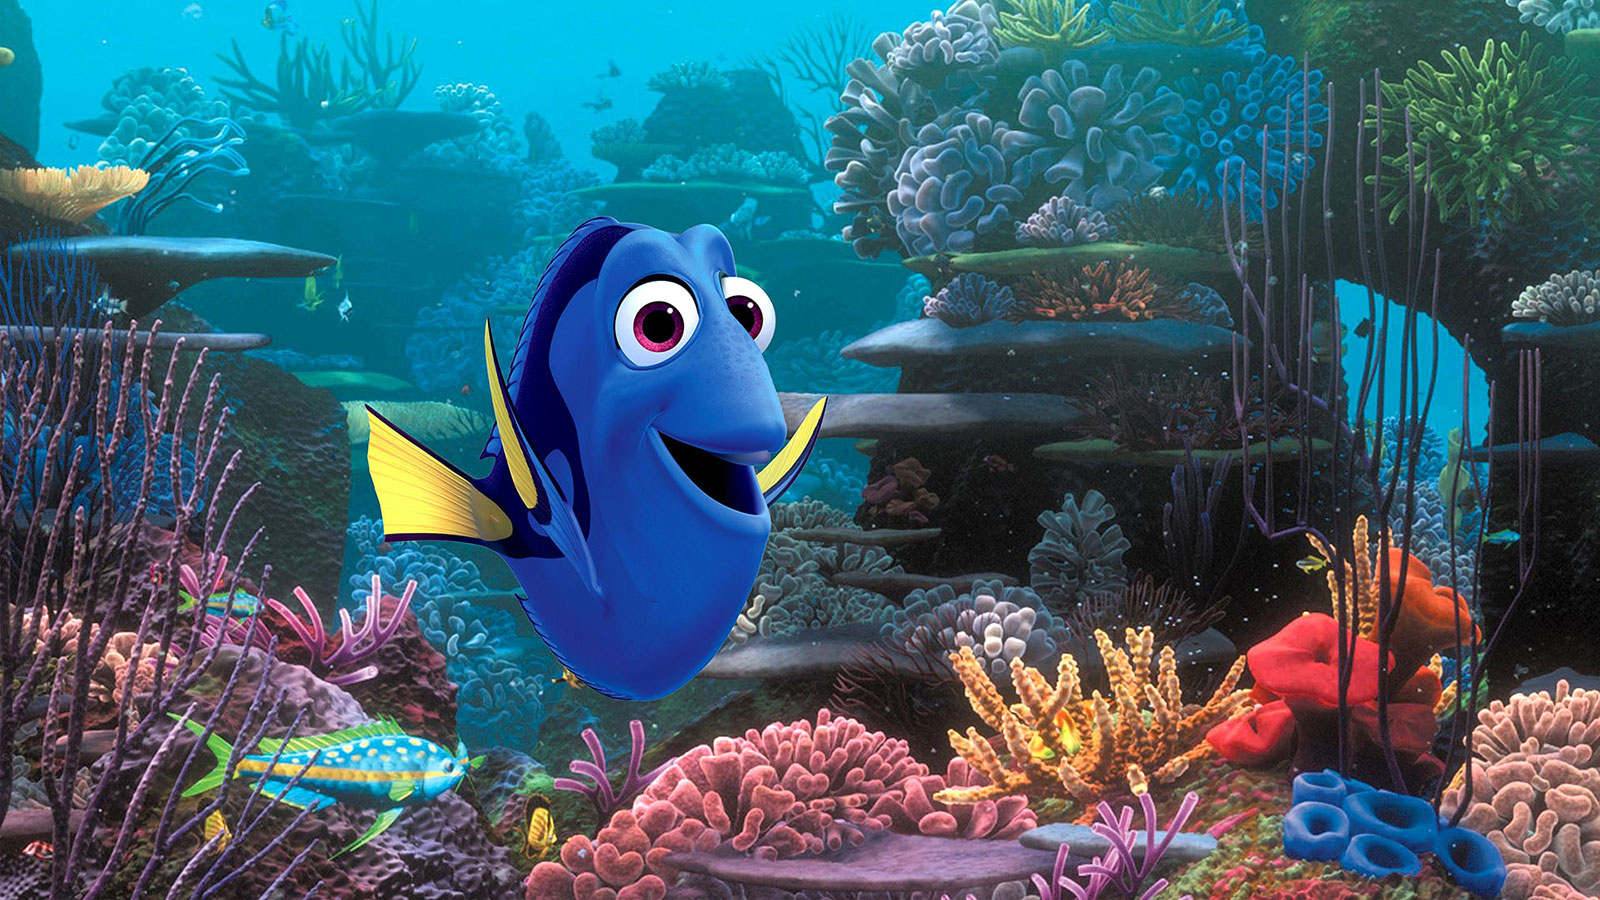 Only a True Pixar Fan Has Watched 18/21 of These Movies Finding Dory